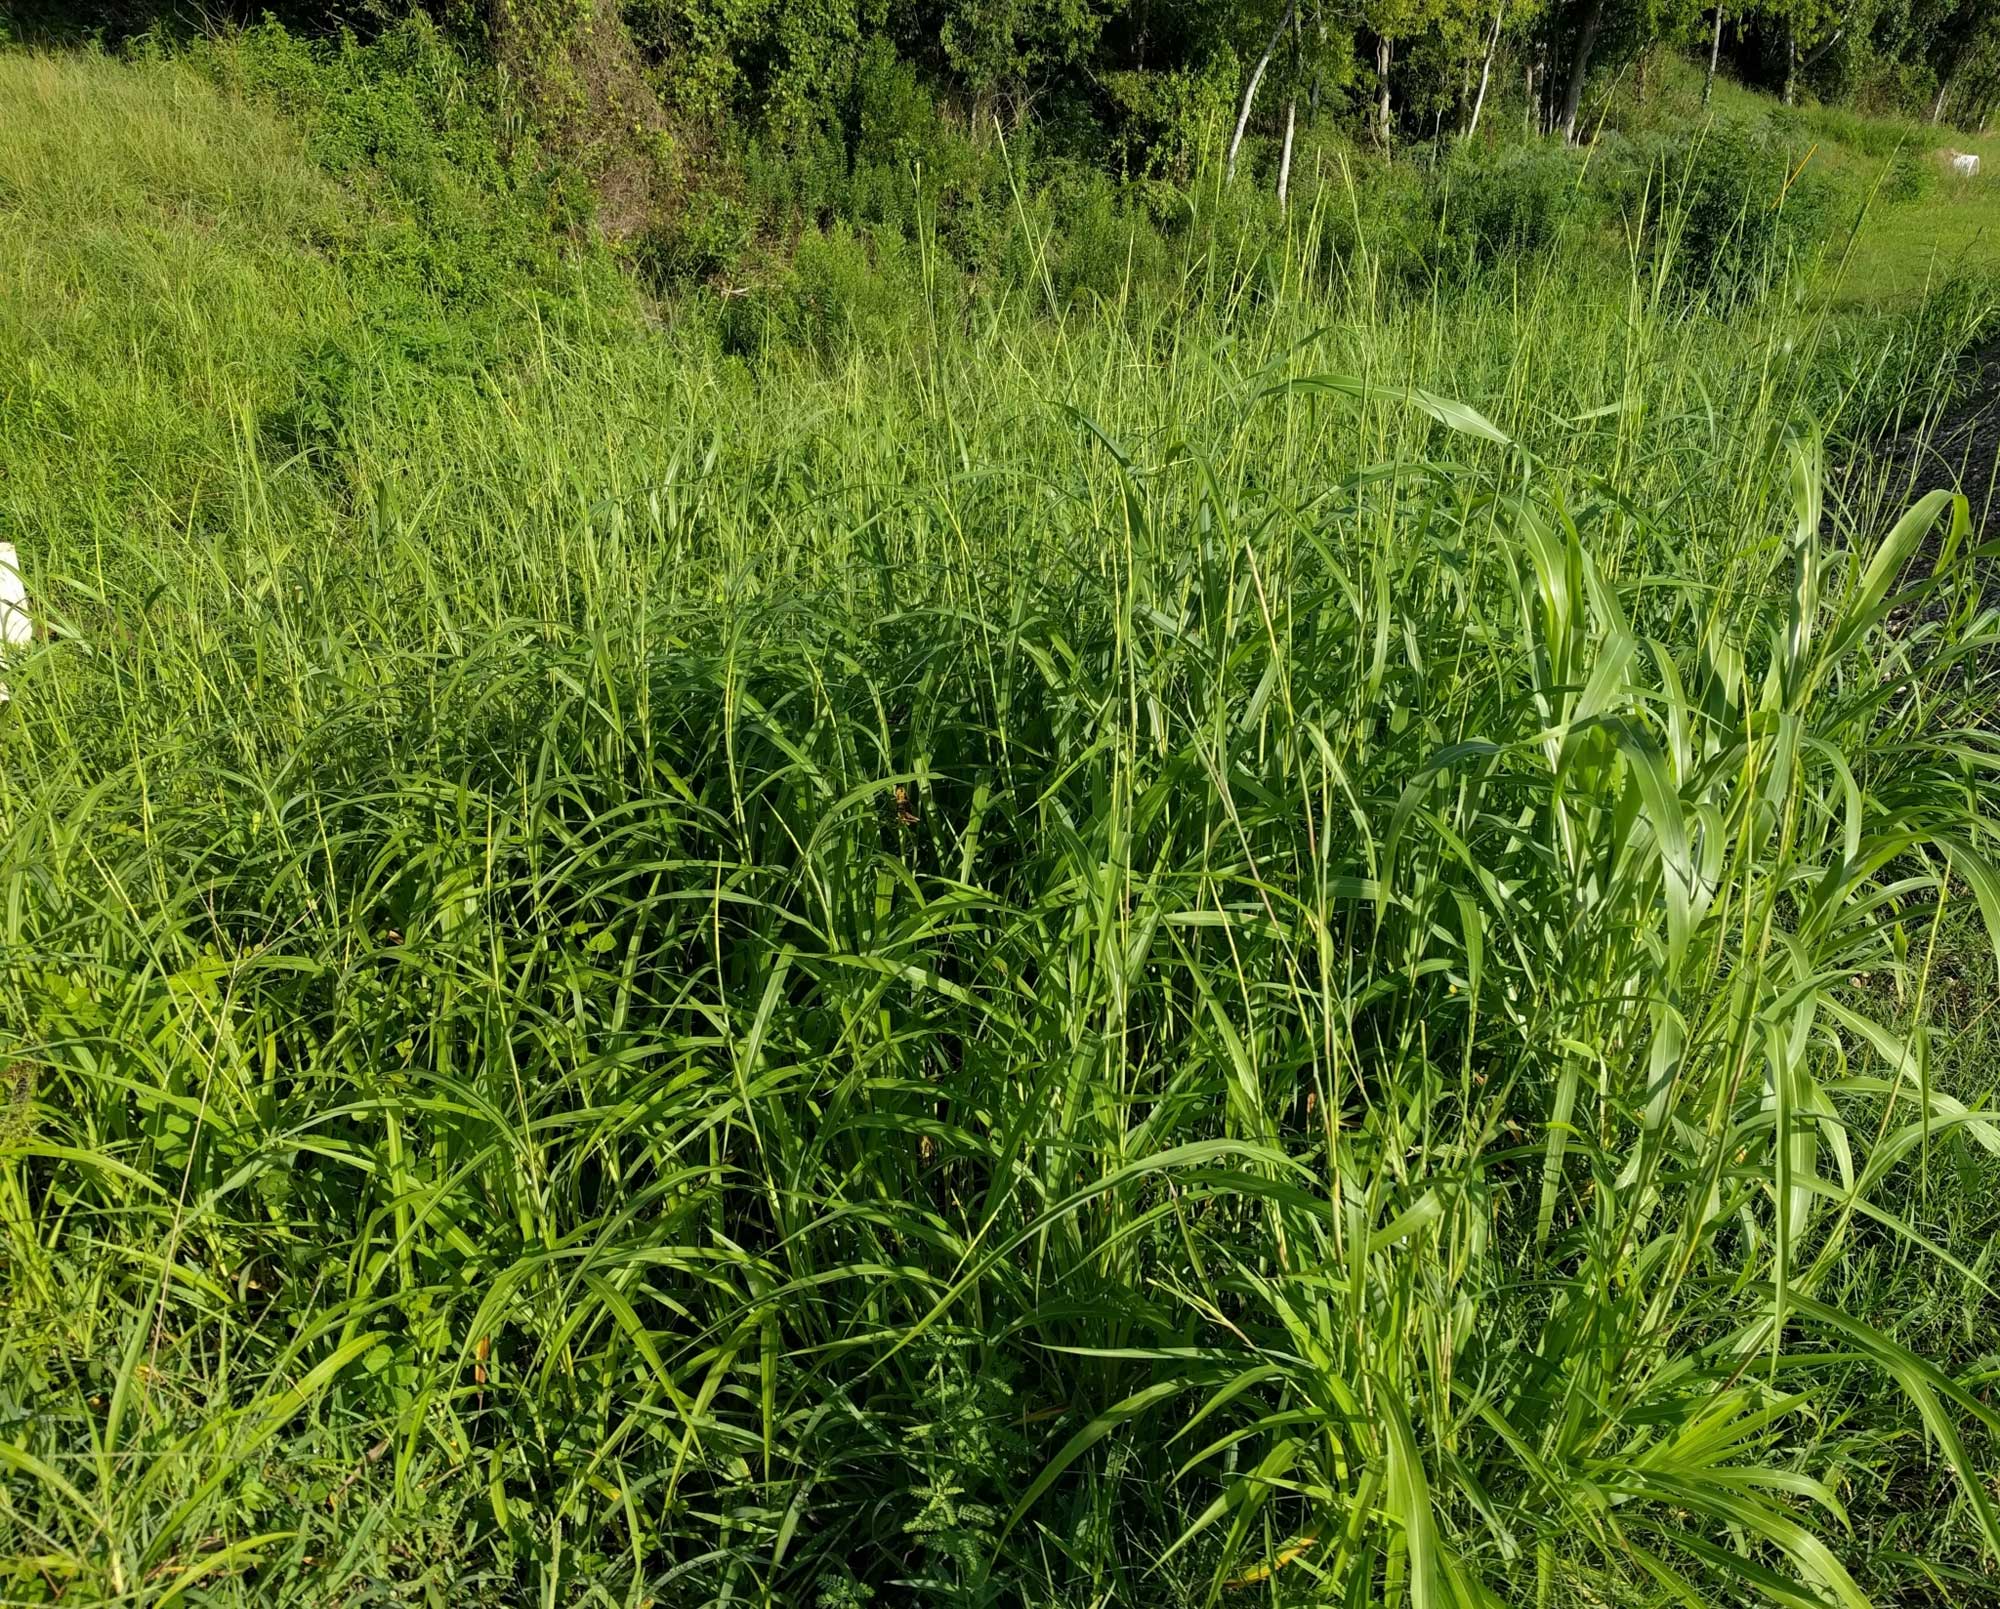 Photograph of a thick clump of itchgrass growing in Lake Charles, Louisiana. The photo shows tall, green grass in the foreground, with other vegetation in the background.